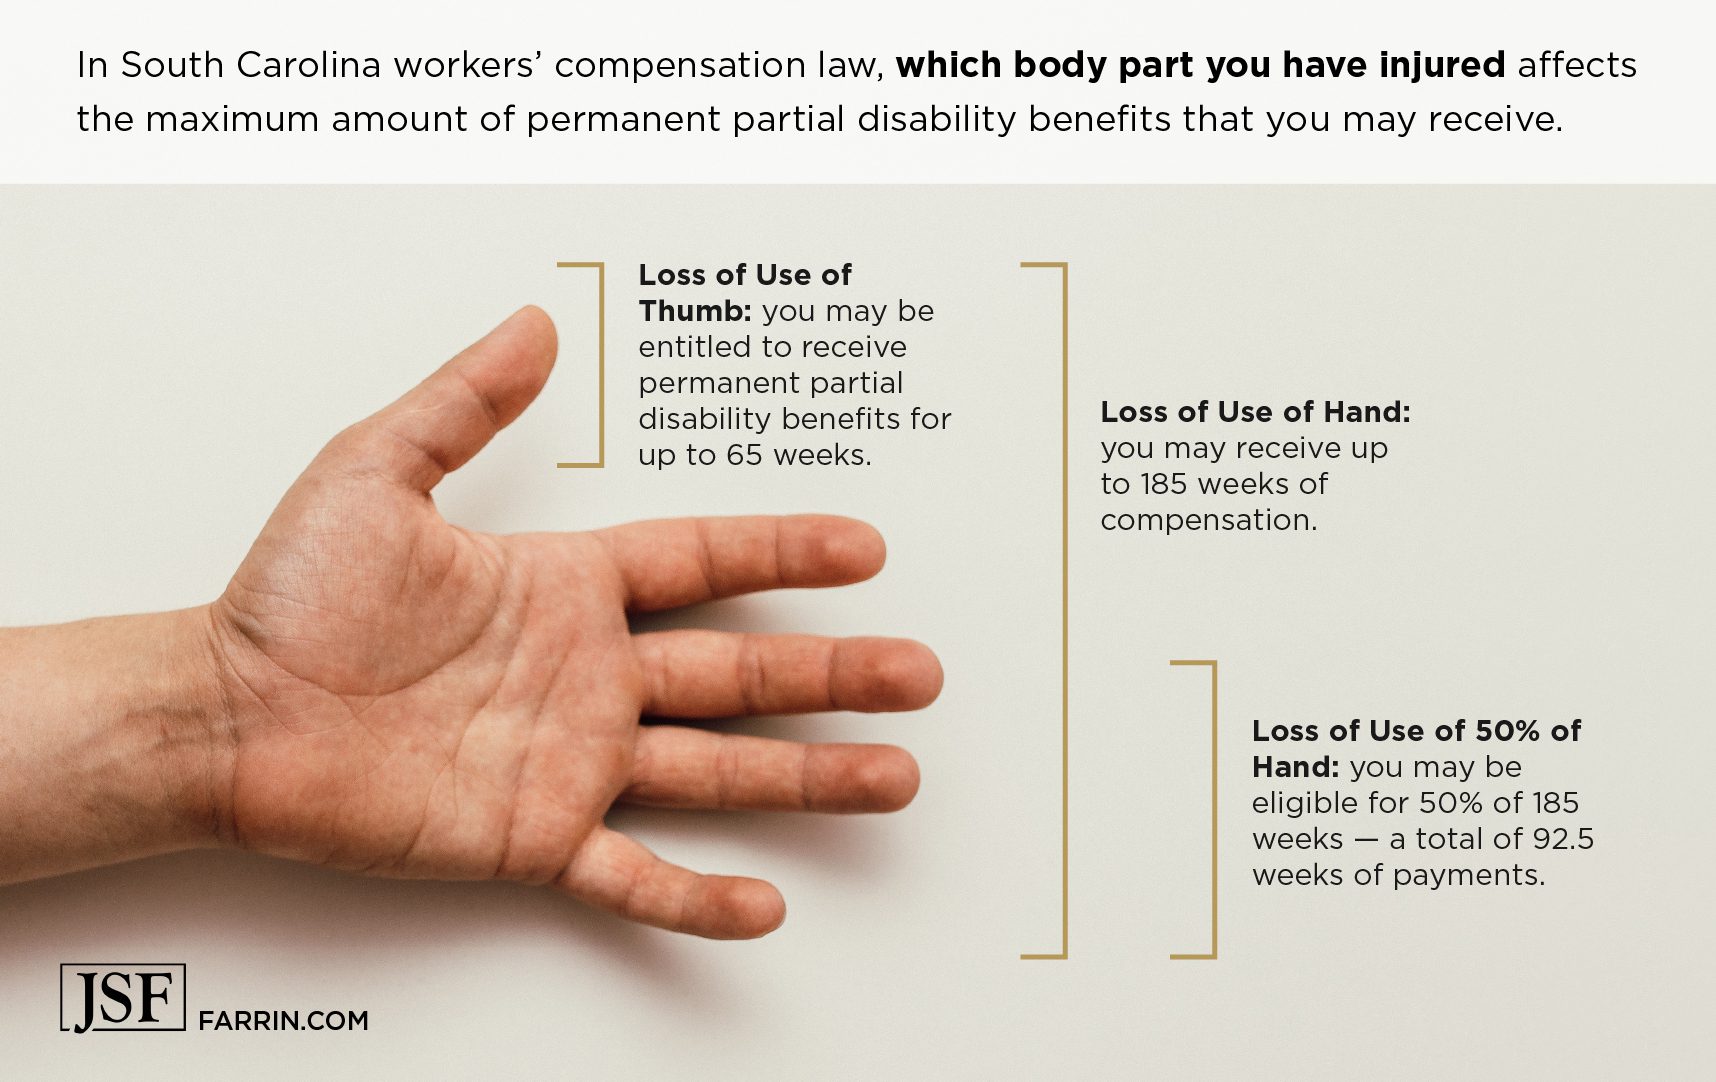 Injuries to different parts of the hand may result in different amounts of compensation.